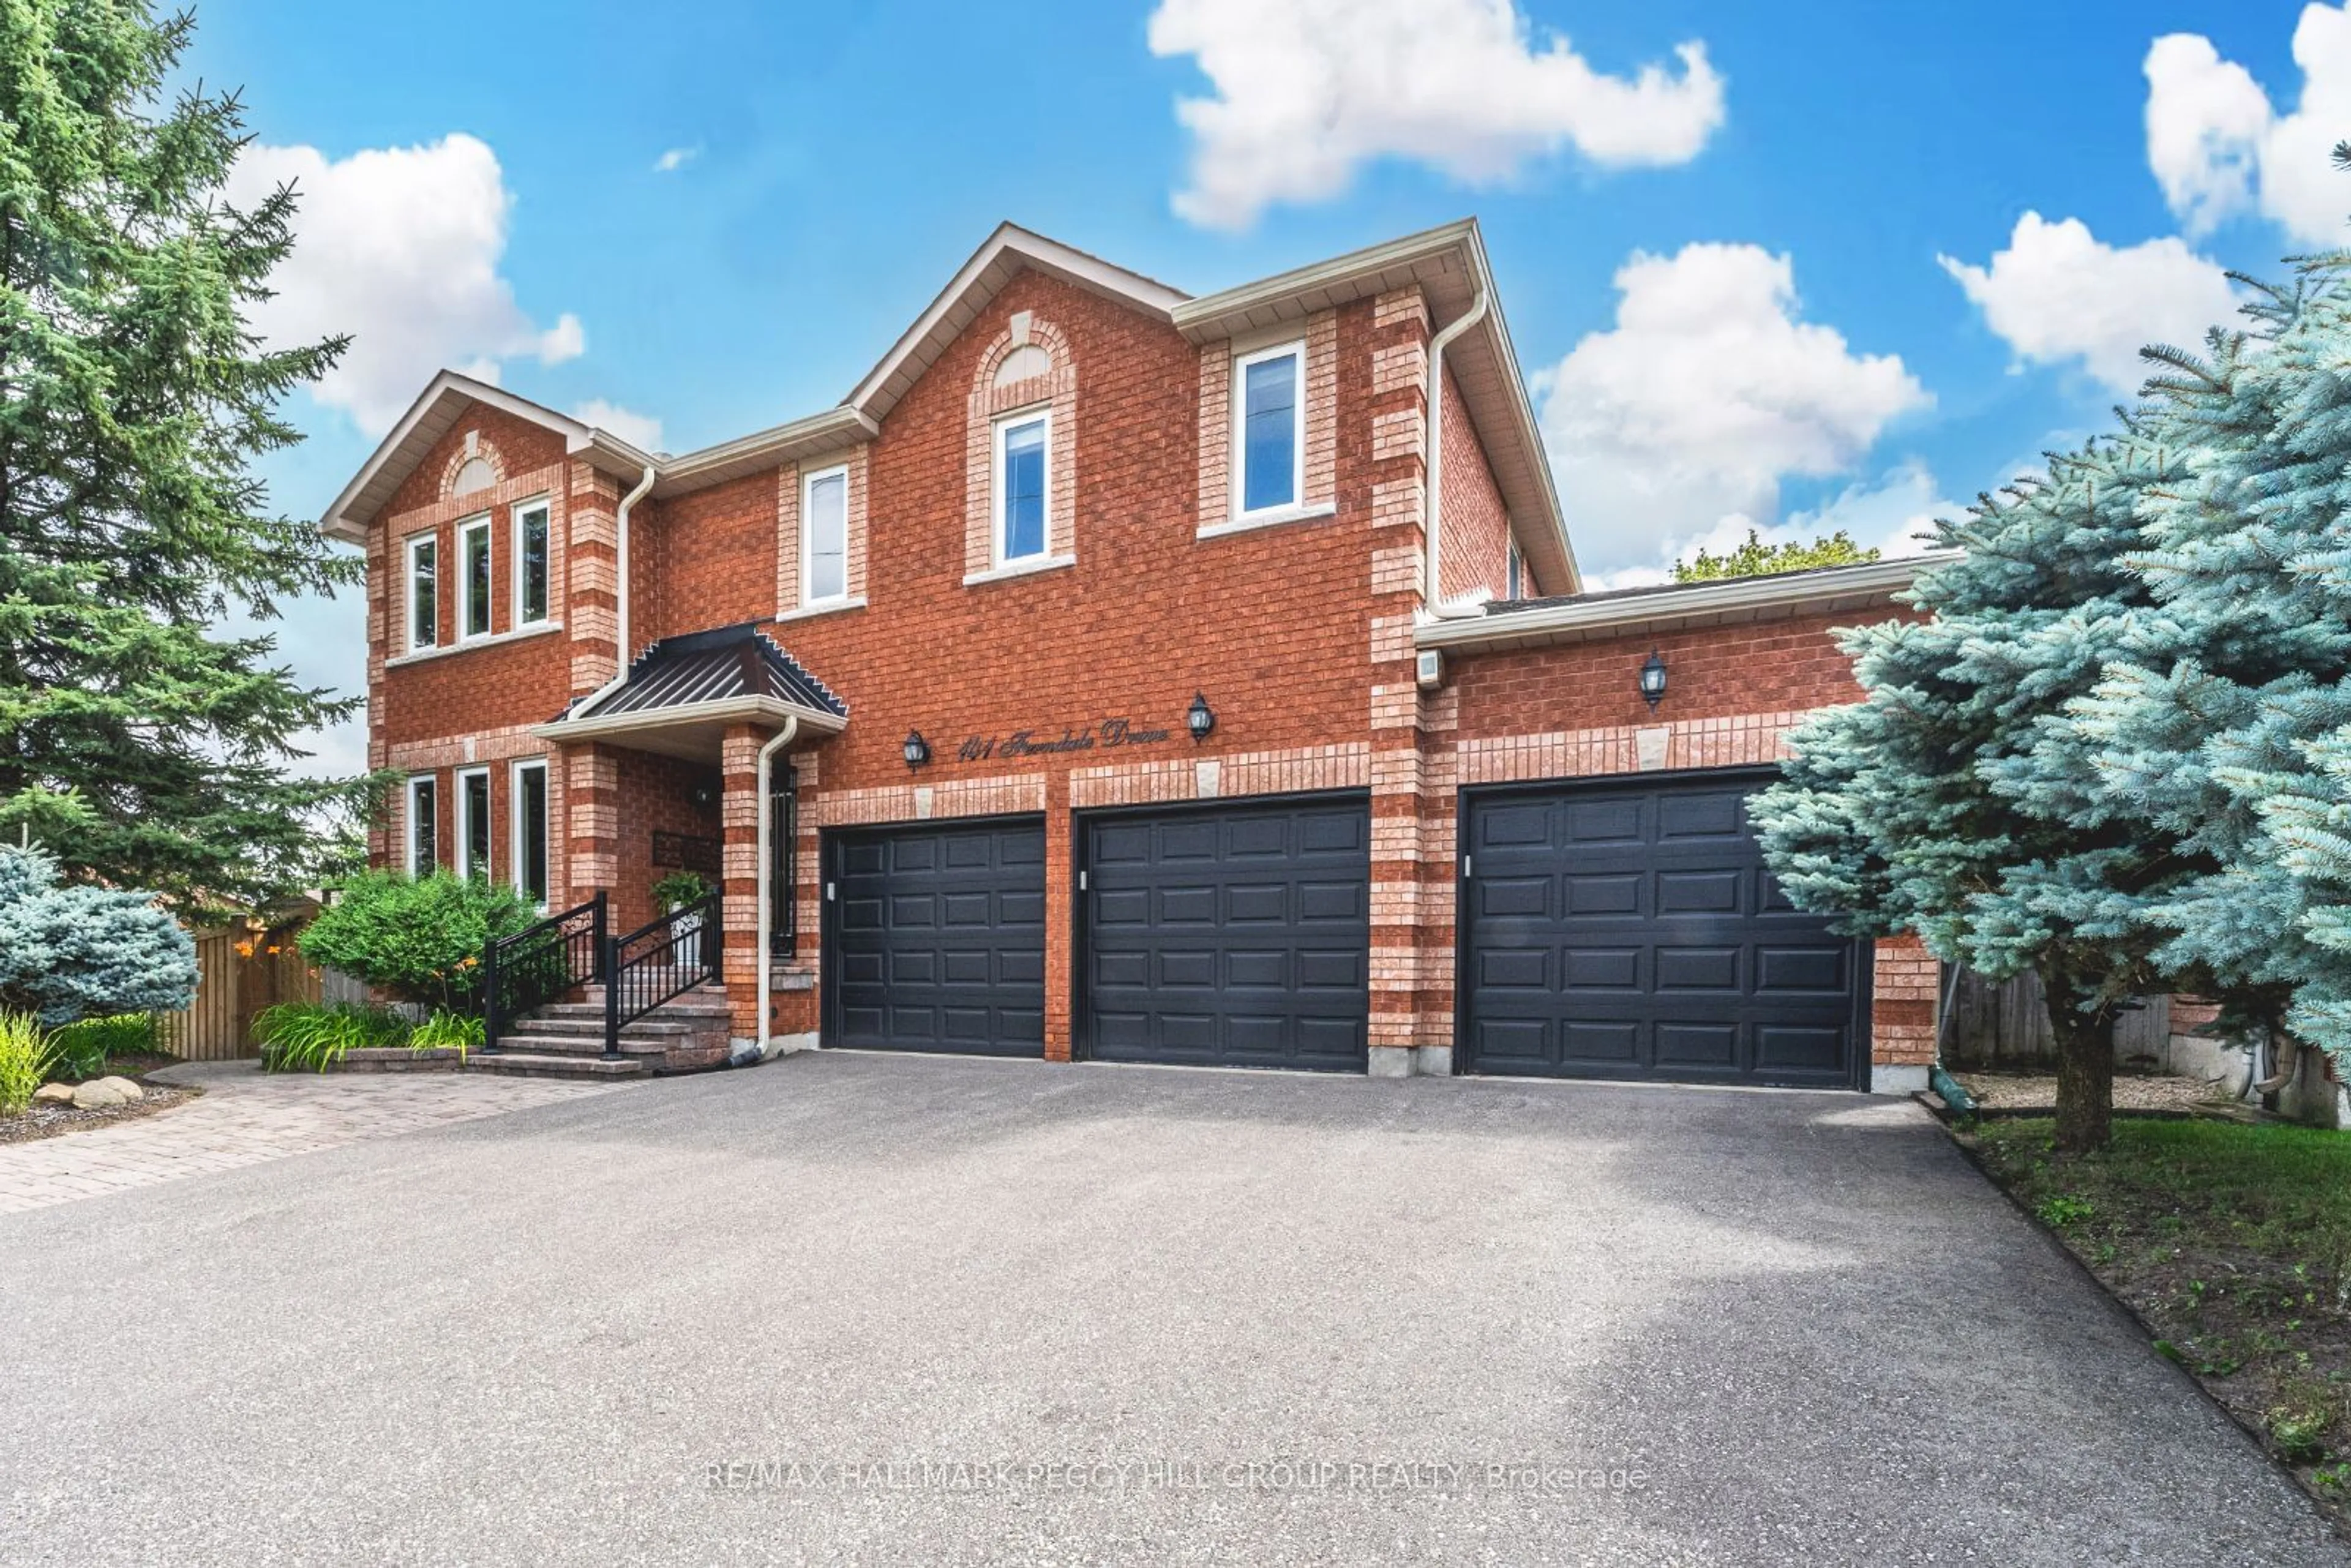 Home with brick exterior material for 141 Ferndale Dr, Barrie Ontario L4N 6X9